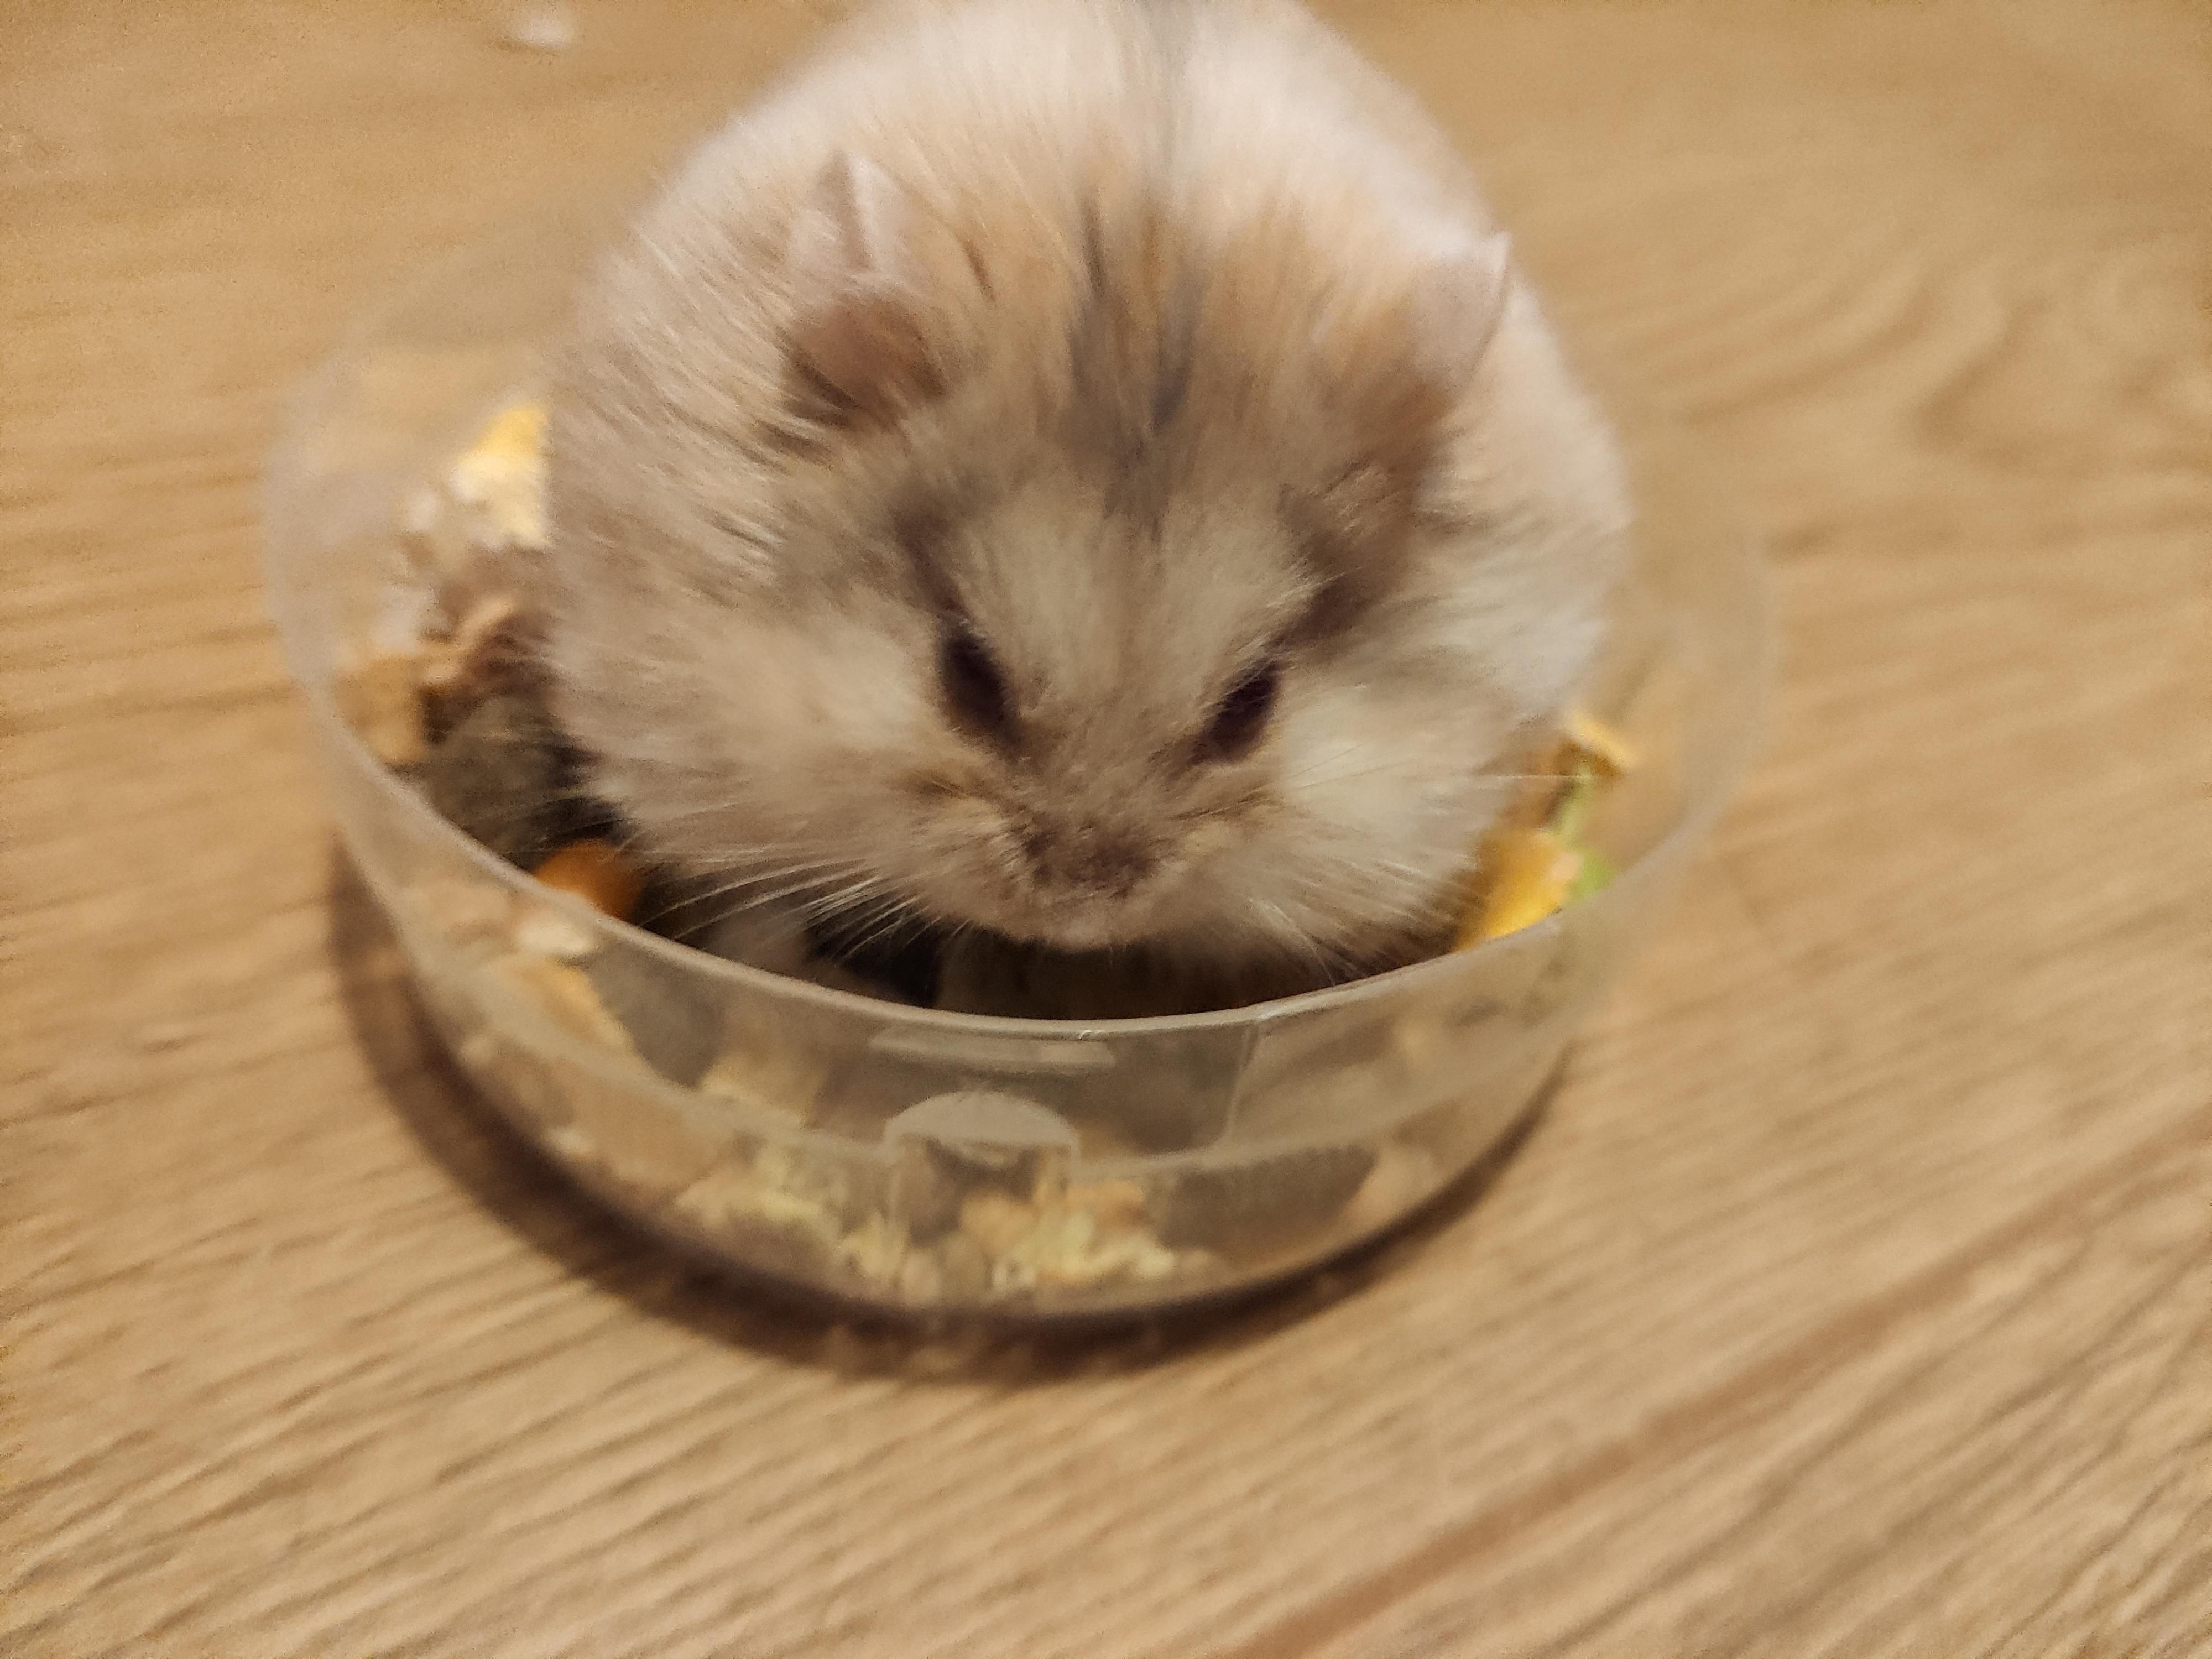 We adopted two obese rescue hamsters today. They've been informed they will be starting a diet and now one has turned into an angry meatball